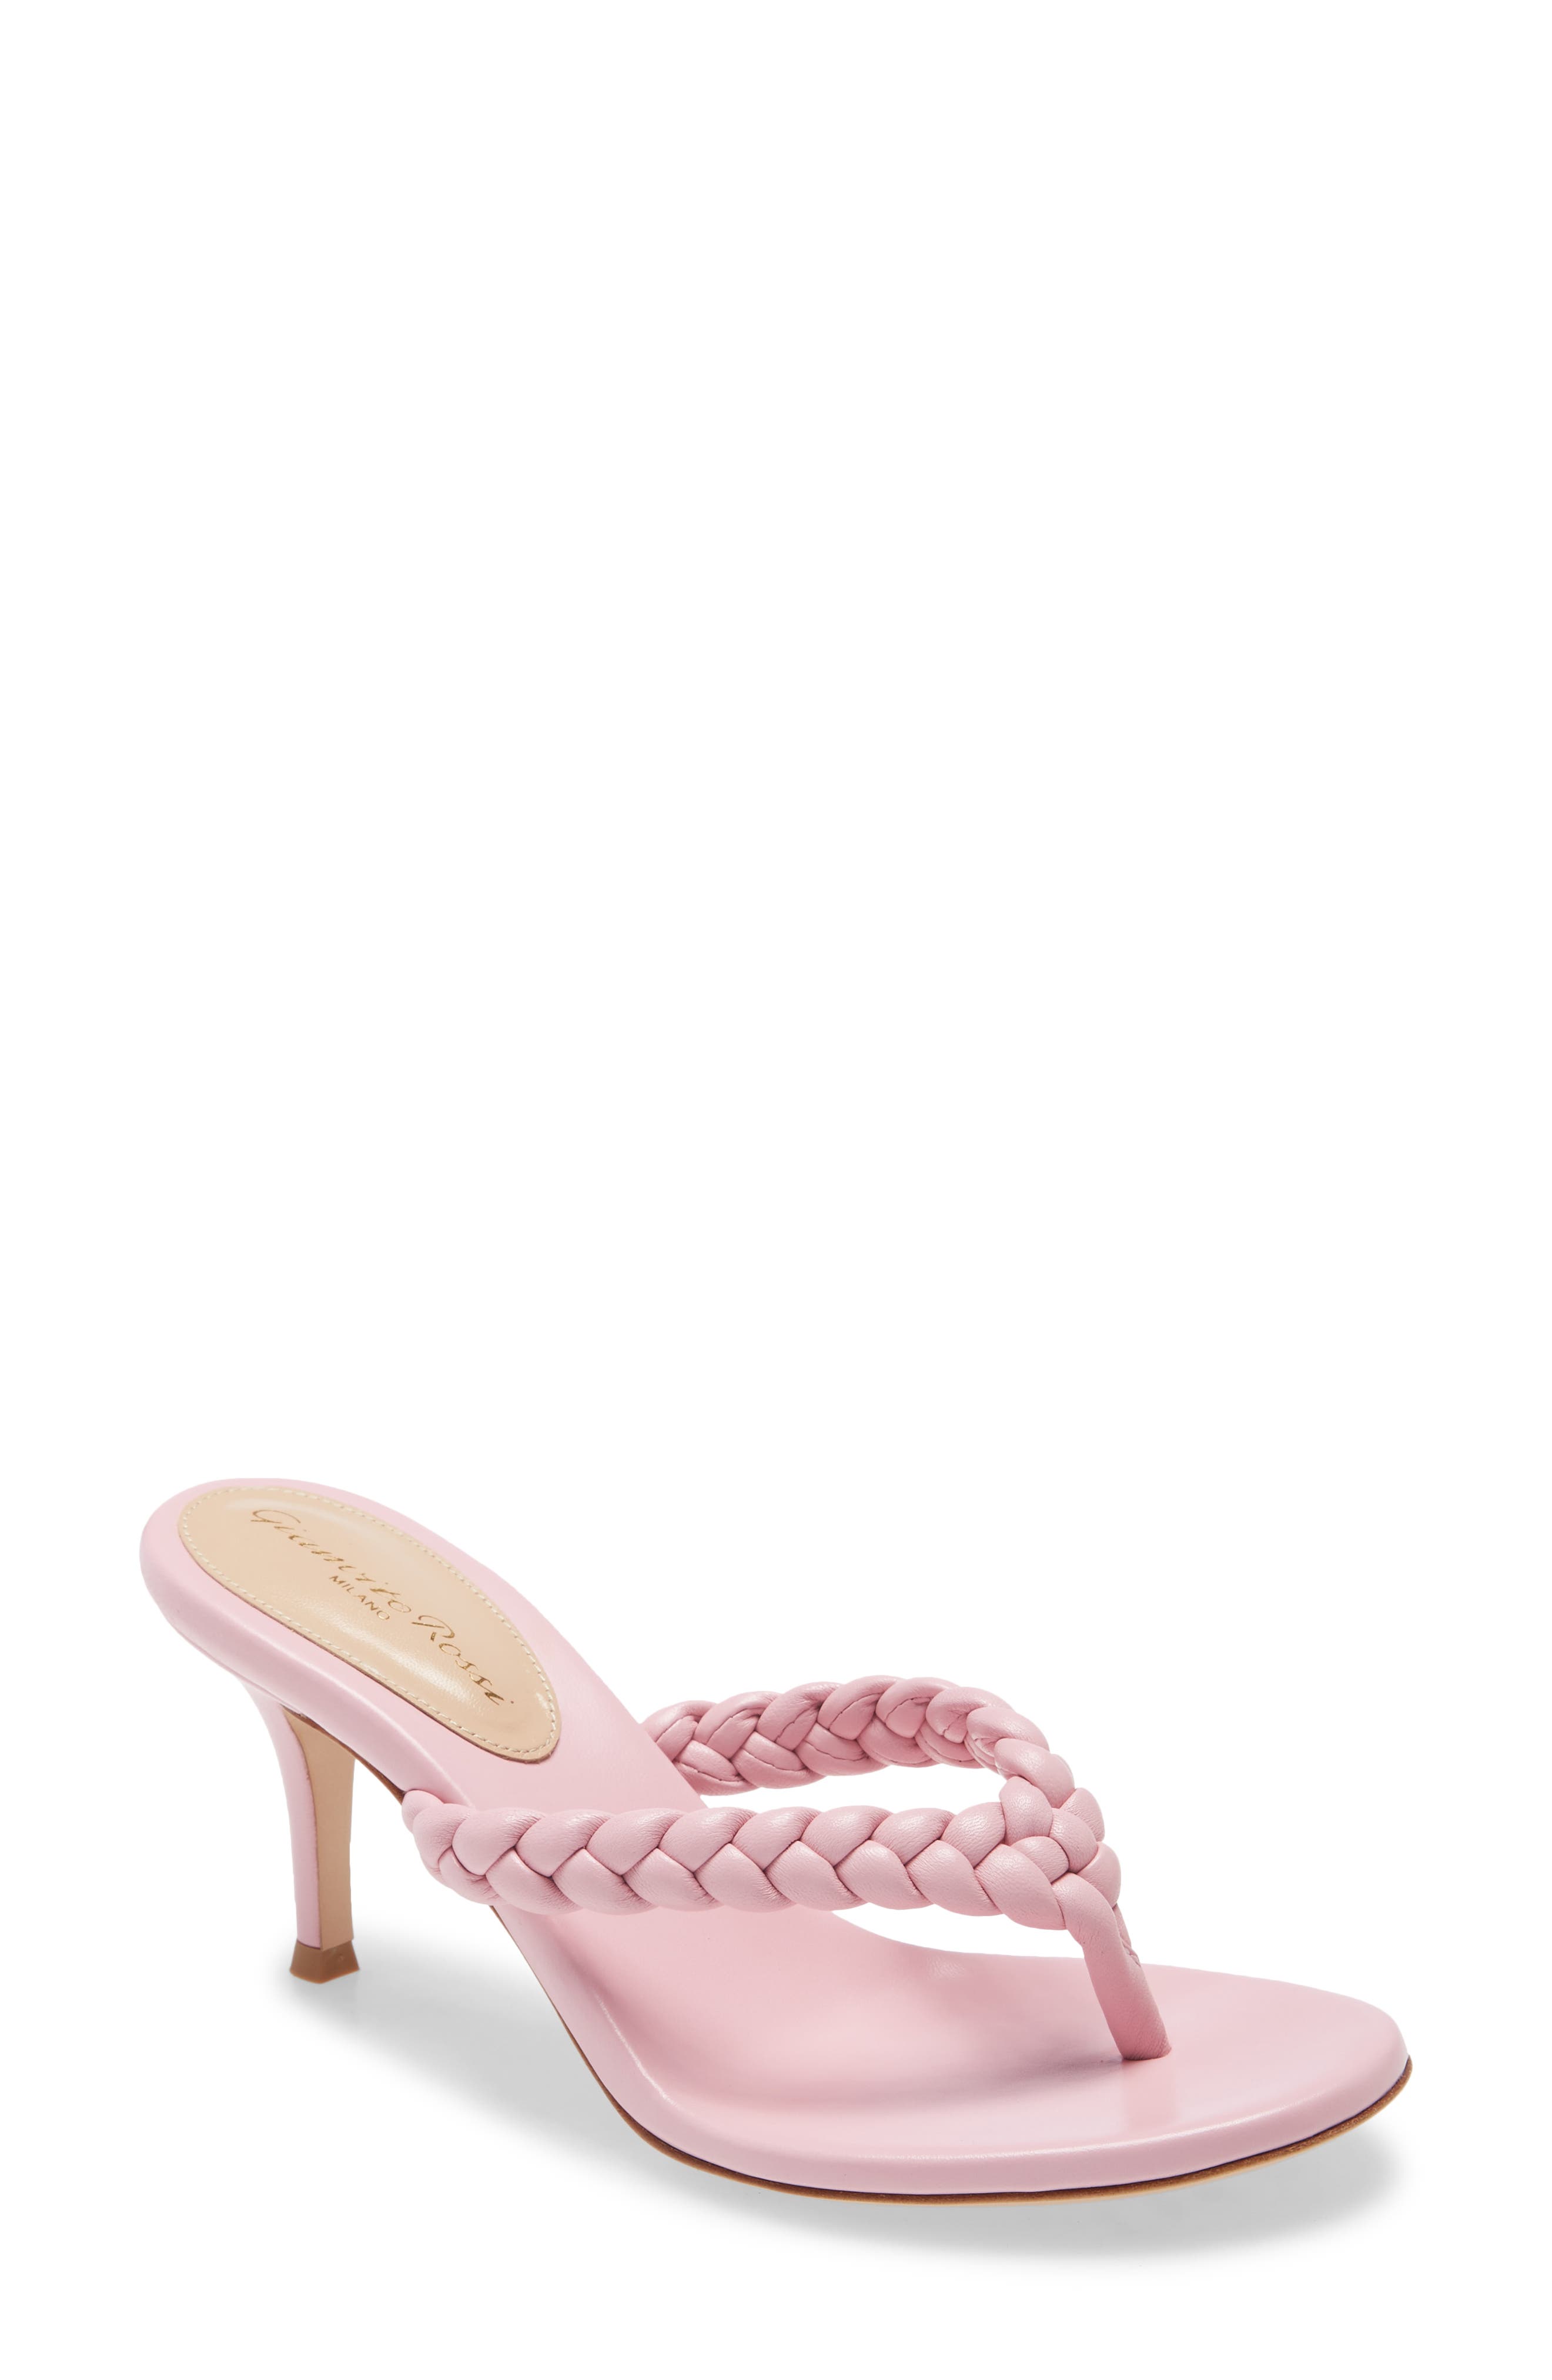 Gianvito Rossi Tropea 70mm Braided Thong Sandals In Pink